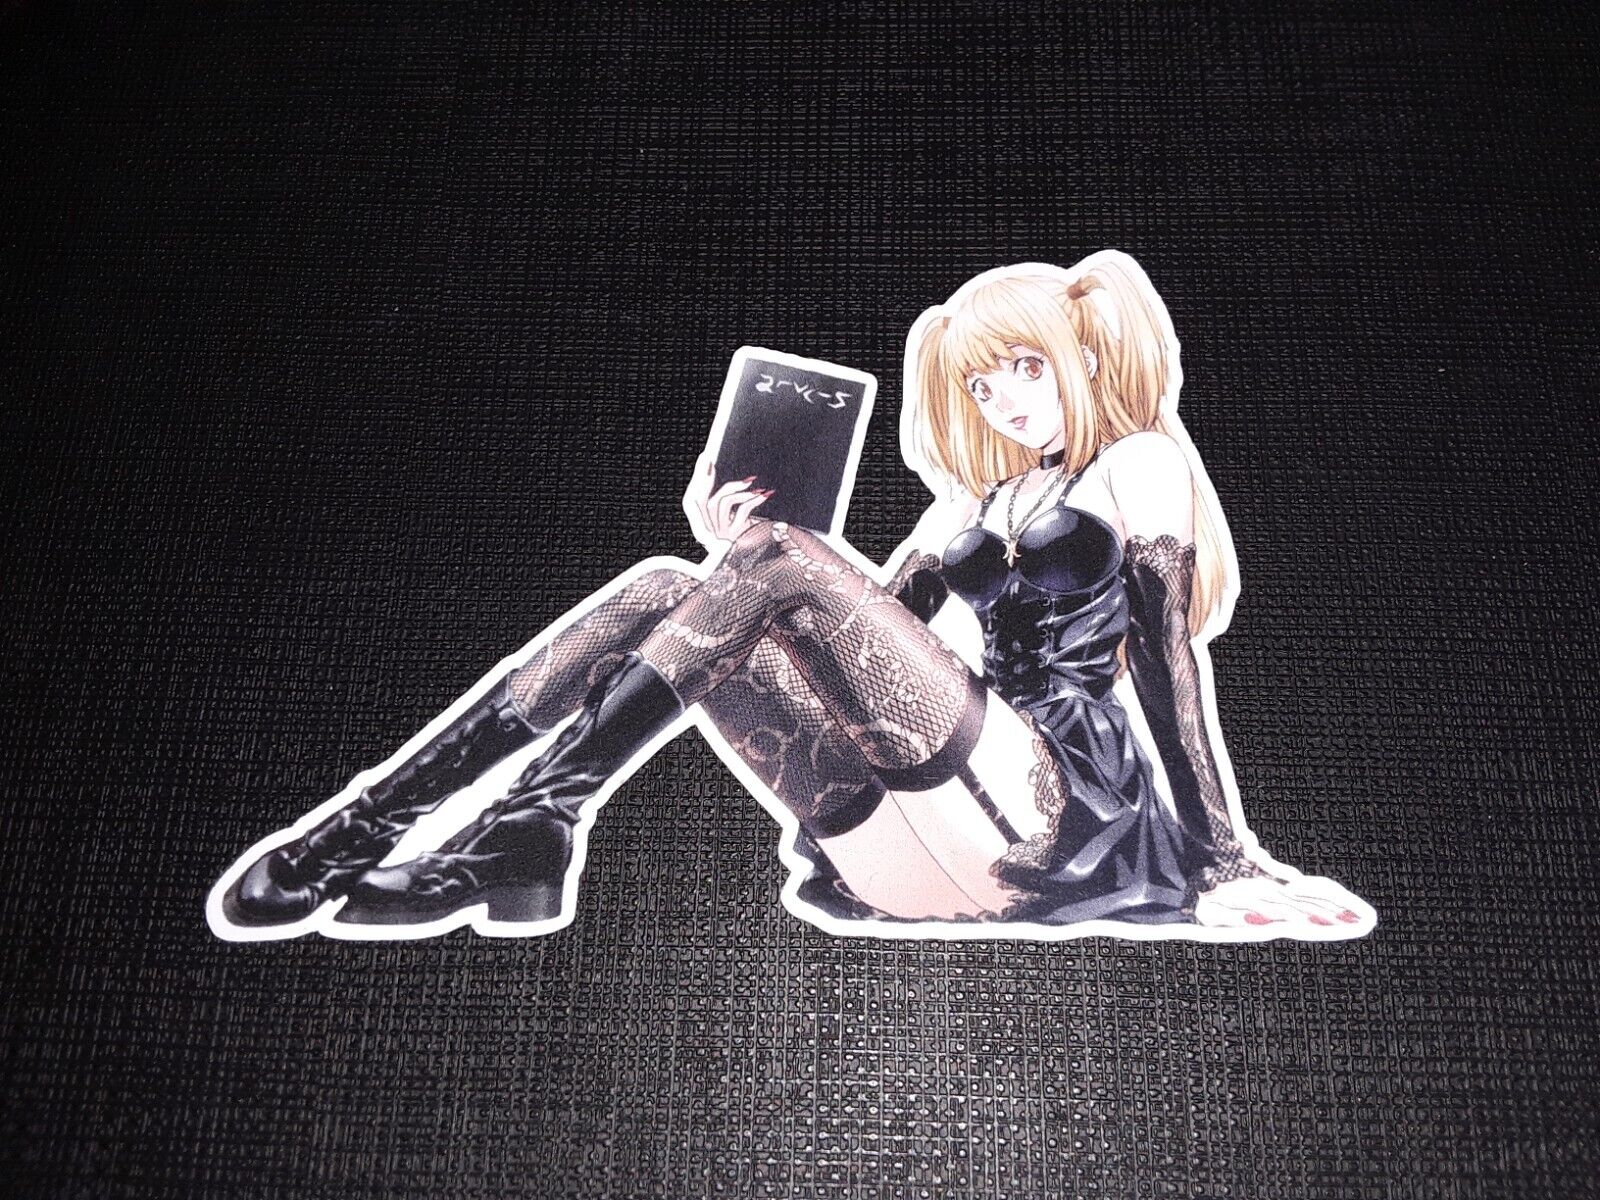 Misa Amane from Death Note Glossy Sticker Anime Waterproof